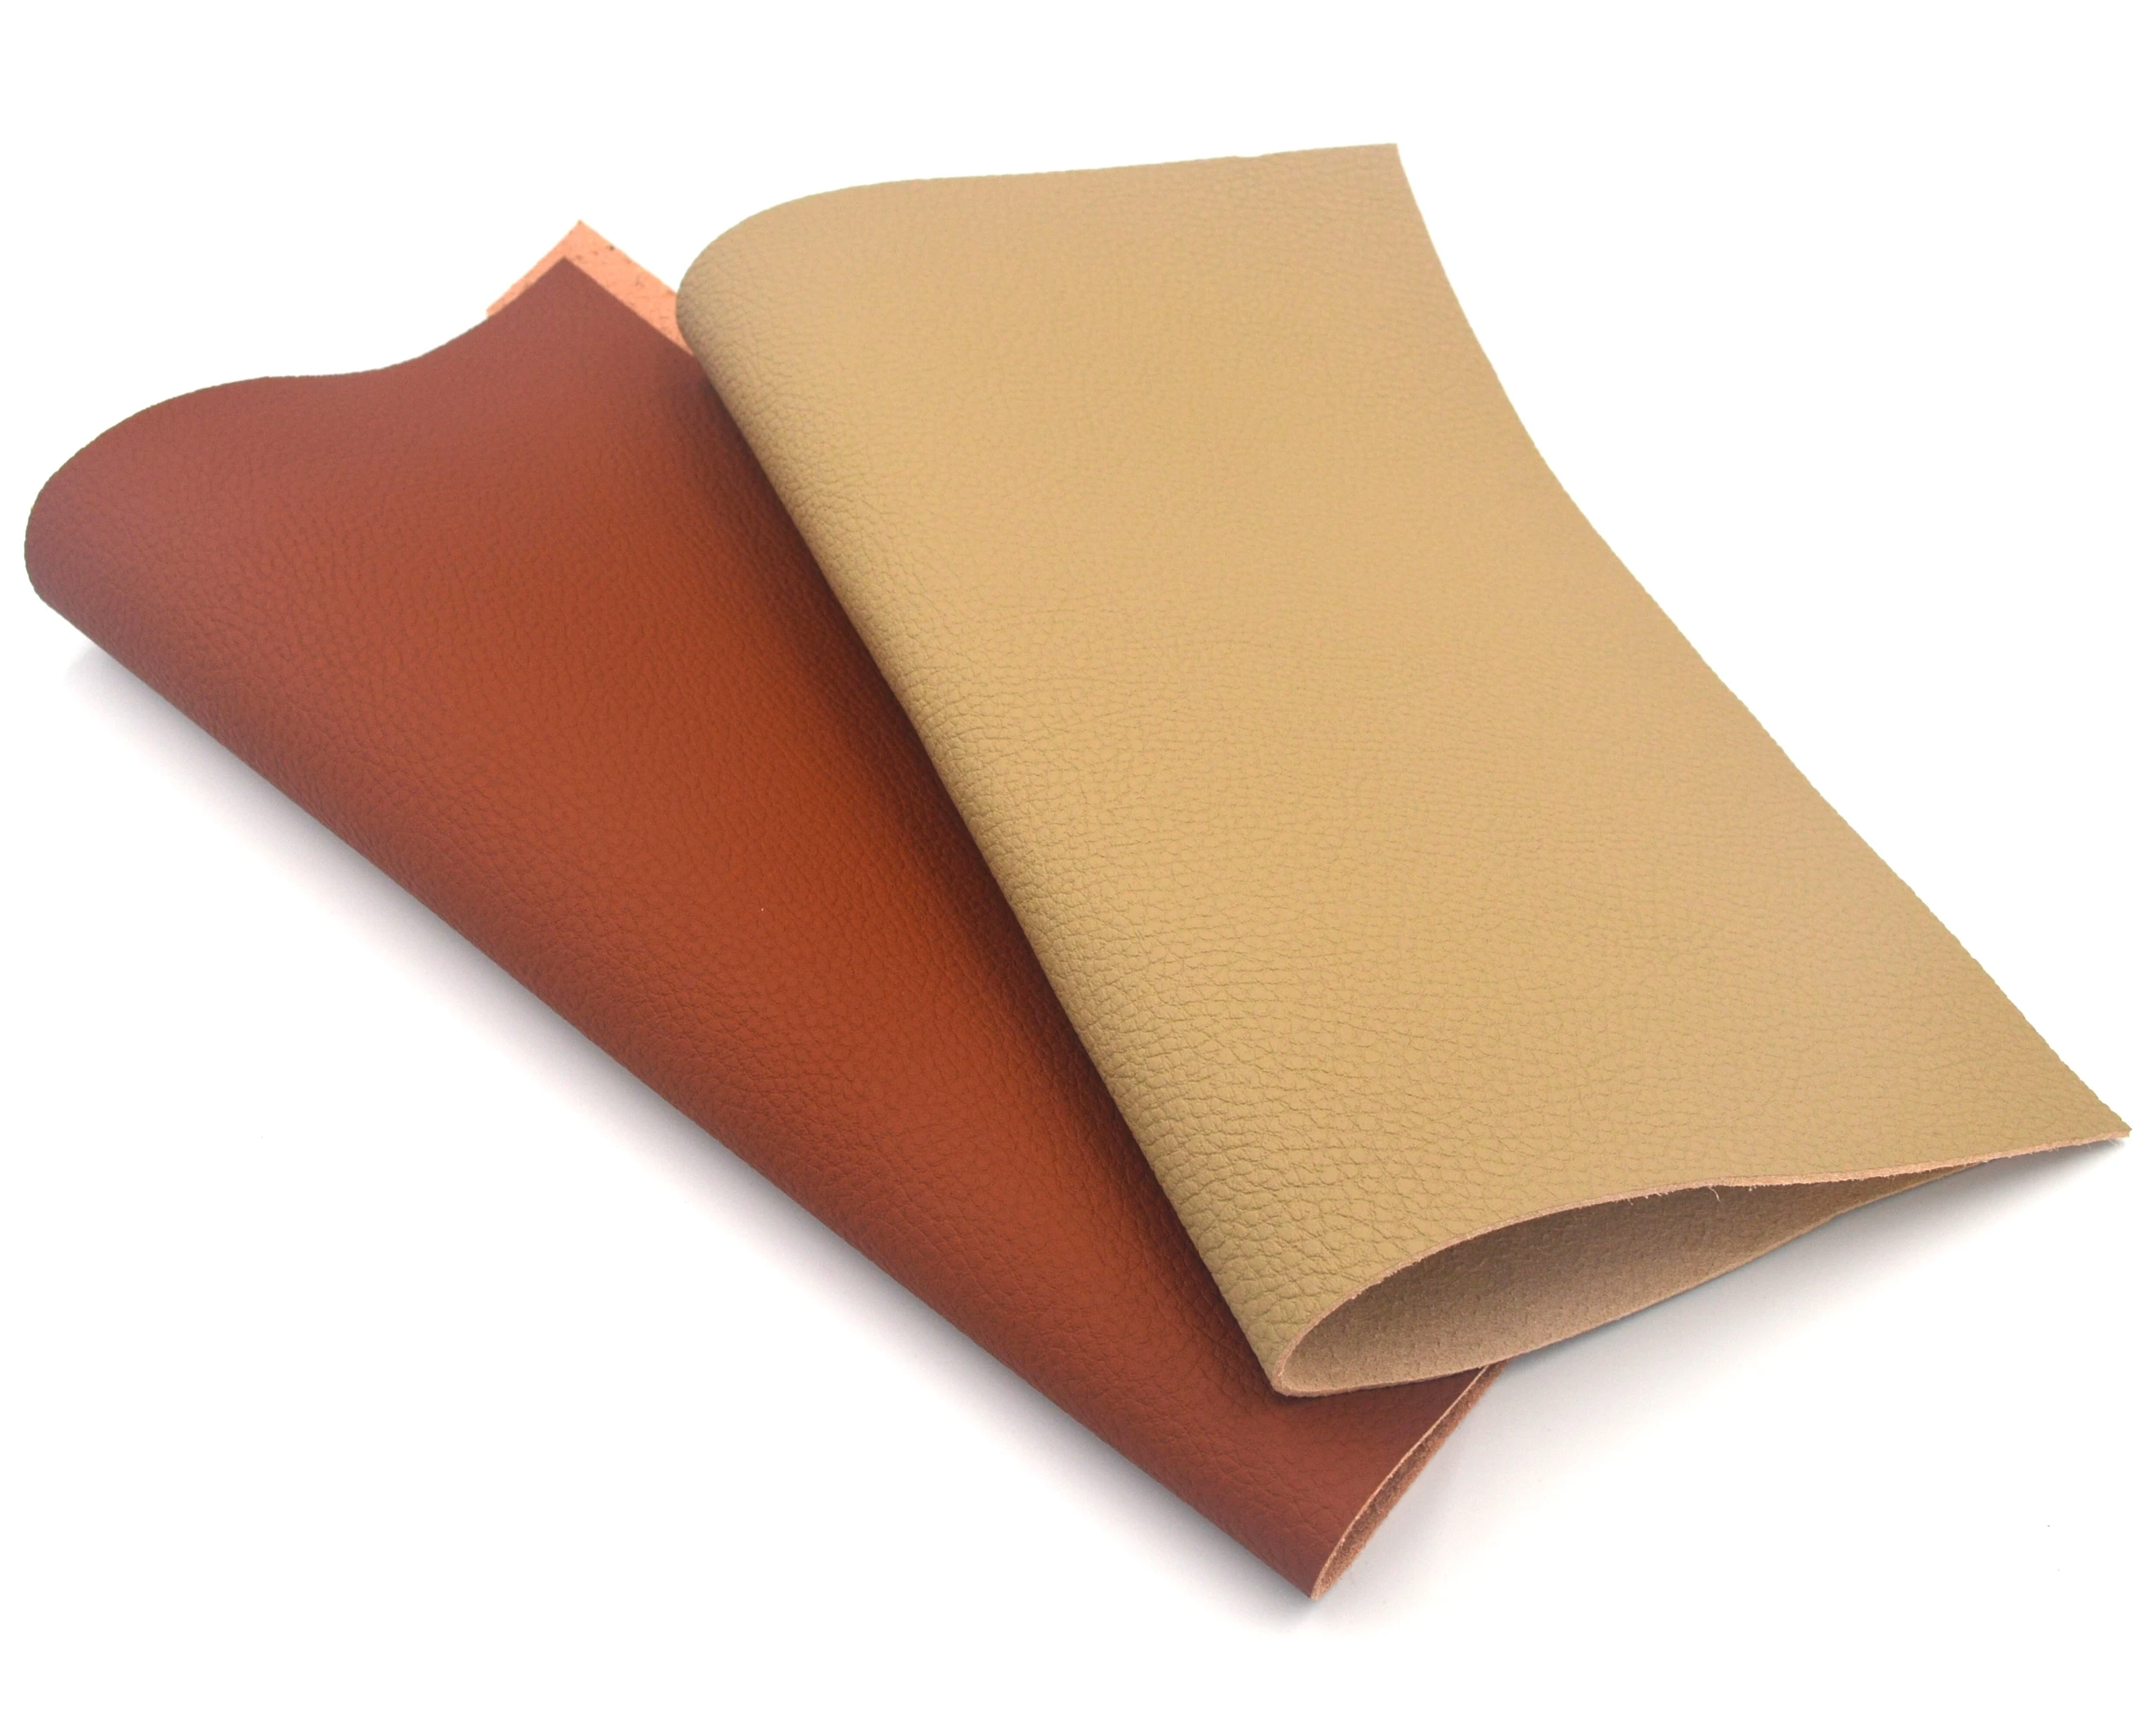 Microfiber leather recycle 1.4mm lychee grain microfiber leather for car seat covers recycled faux leather